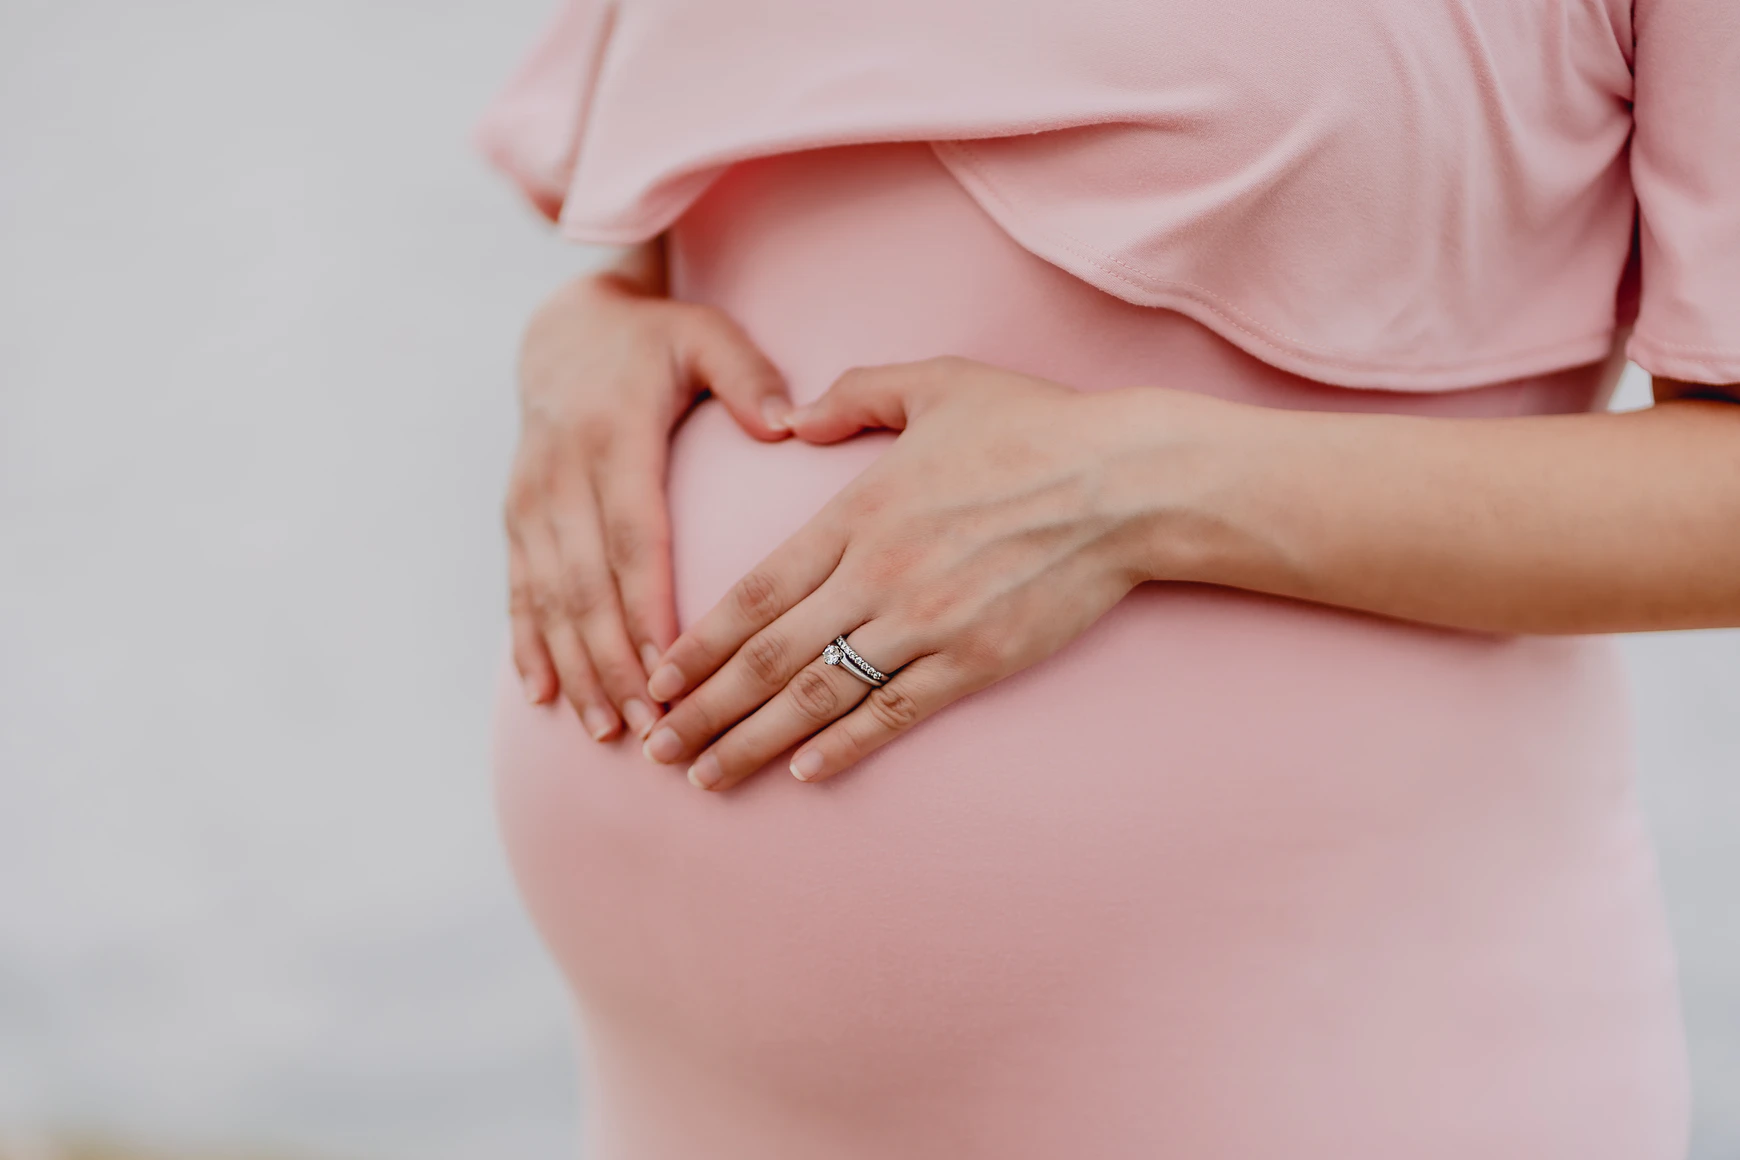 A woman showing her baby bump. | Source: Unsplash